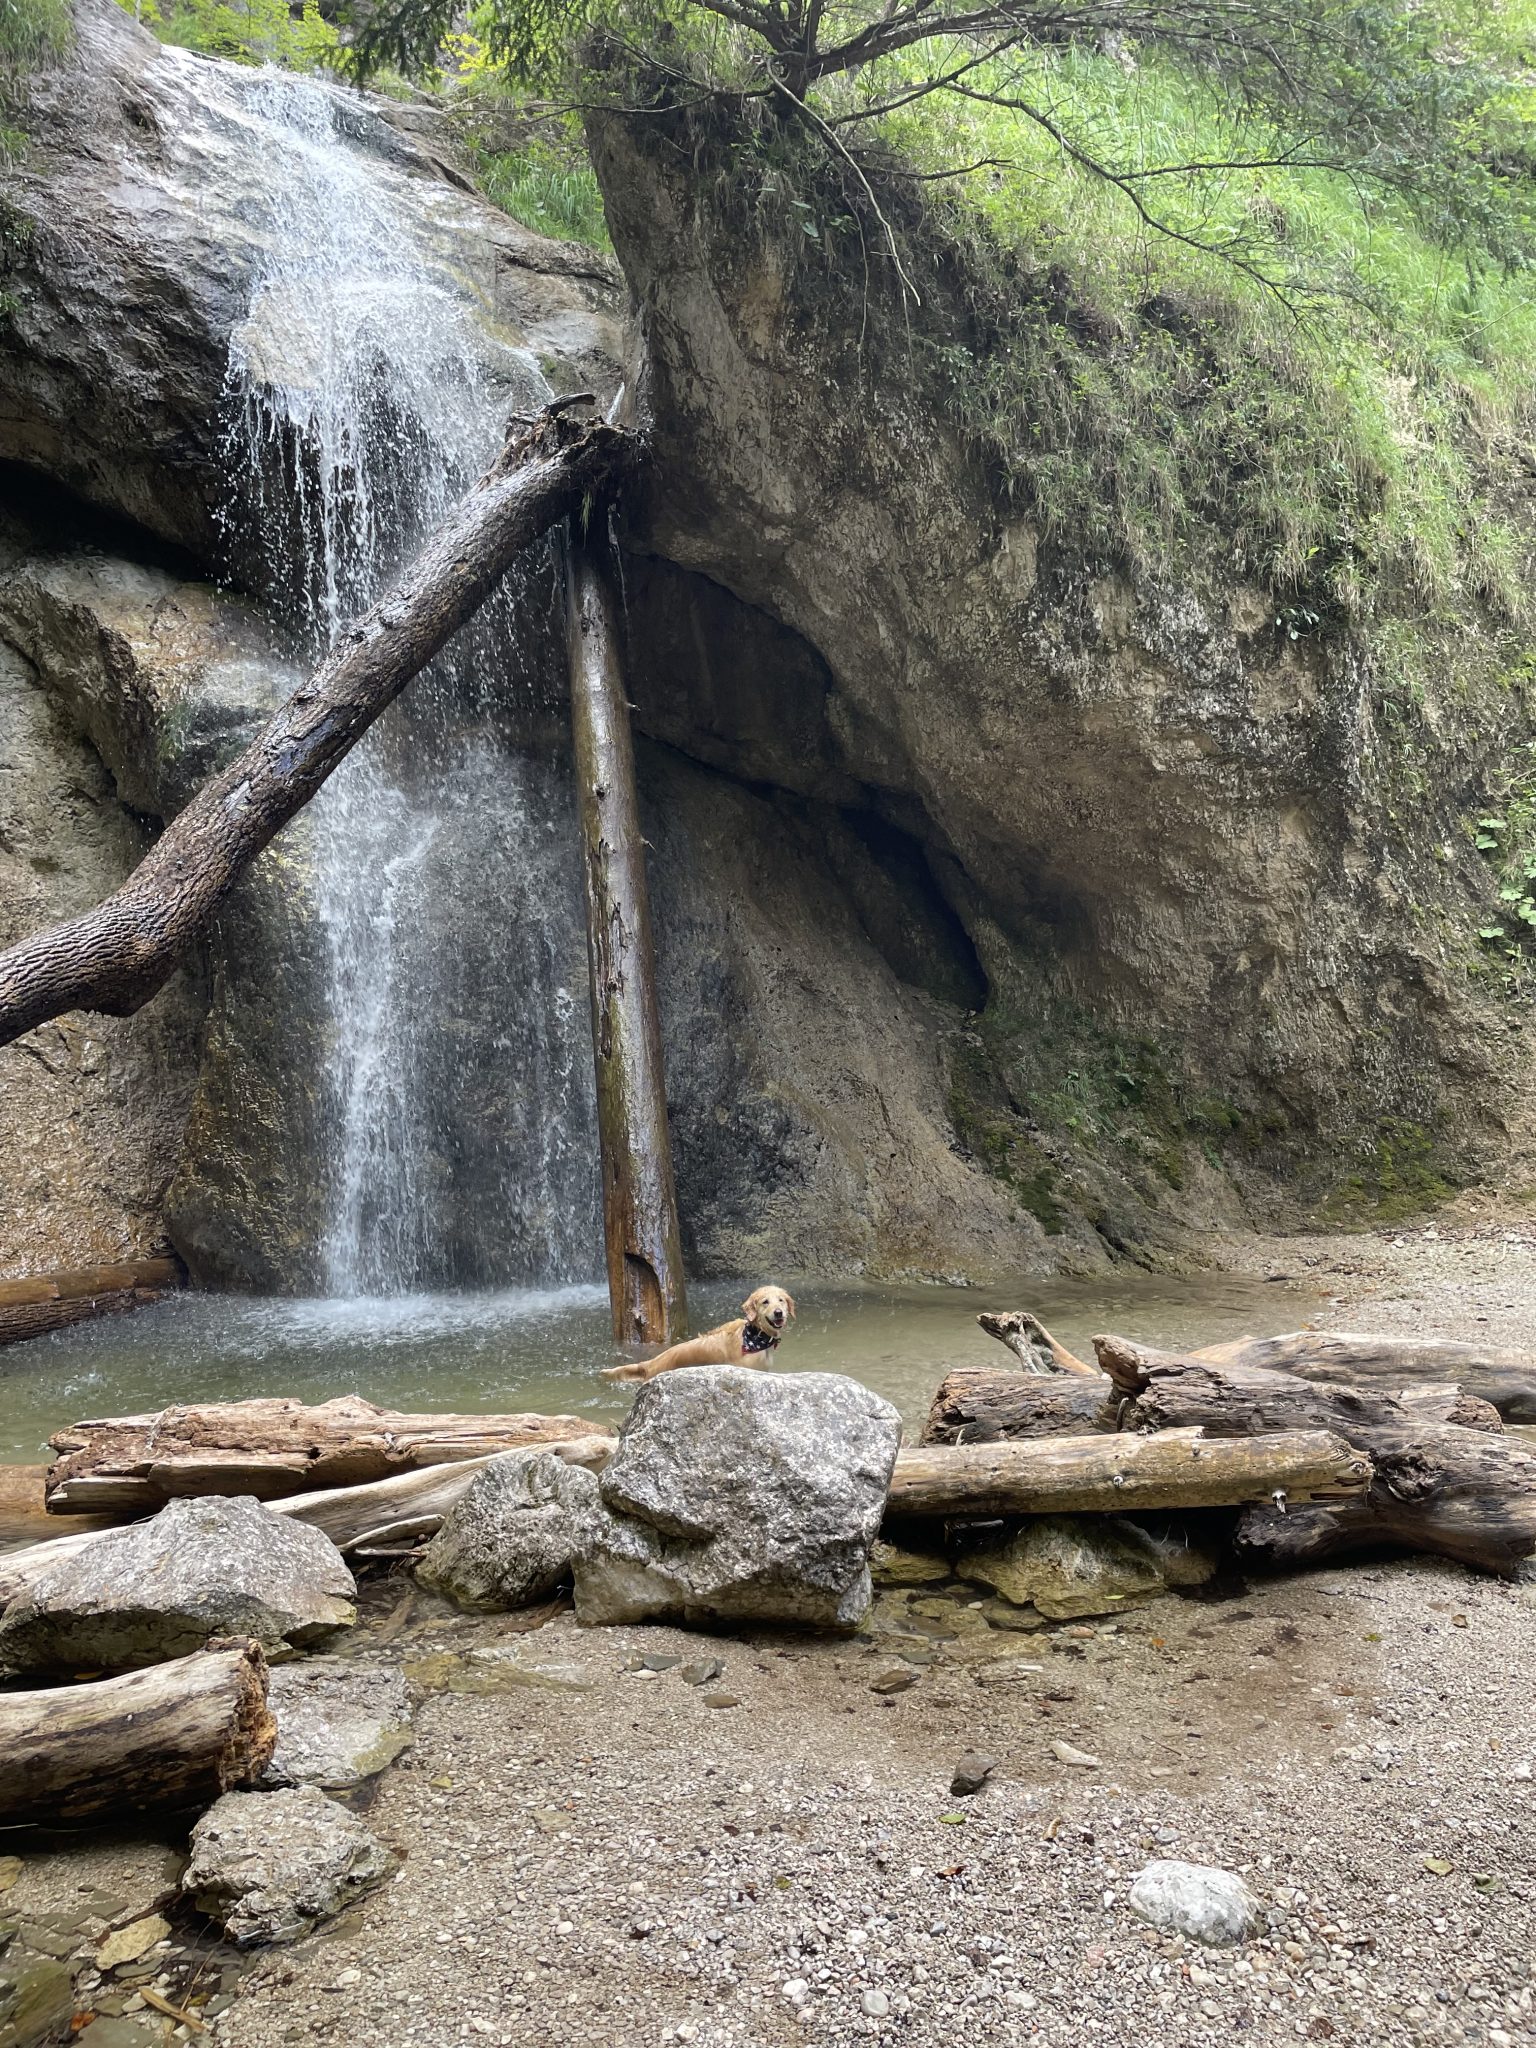 Golden retriever standing in front of a waterfall